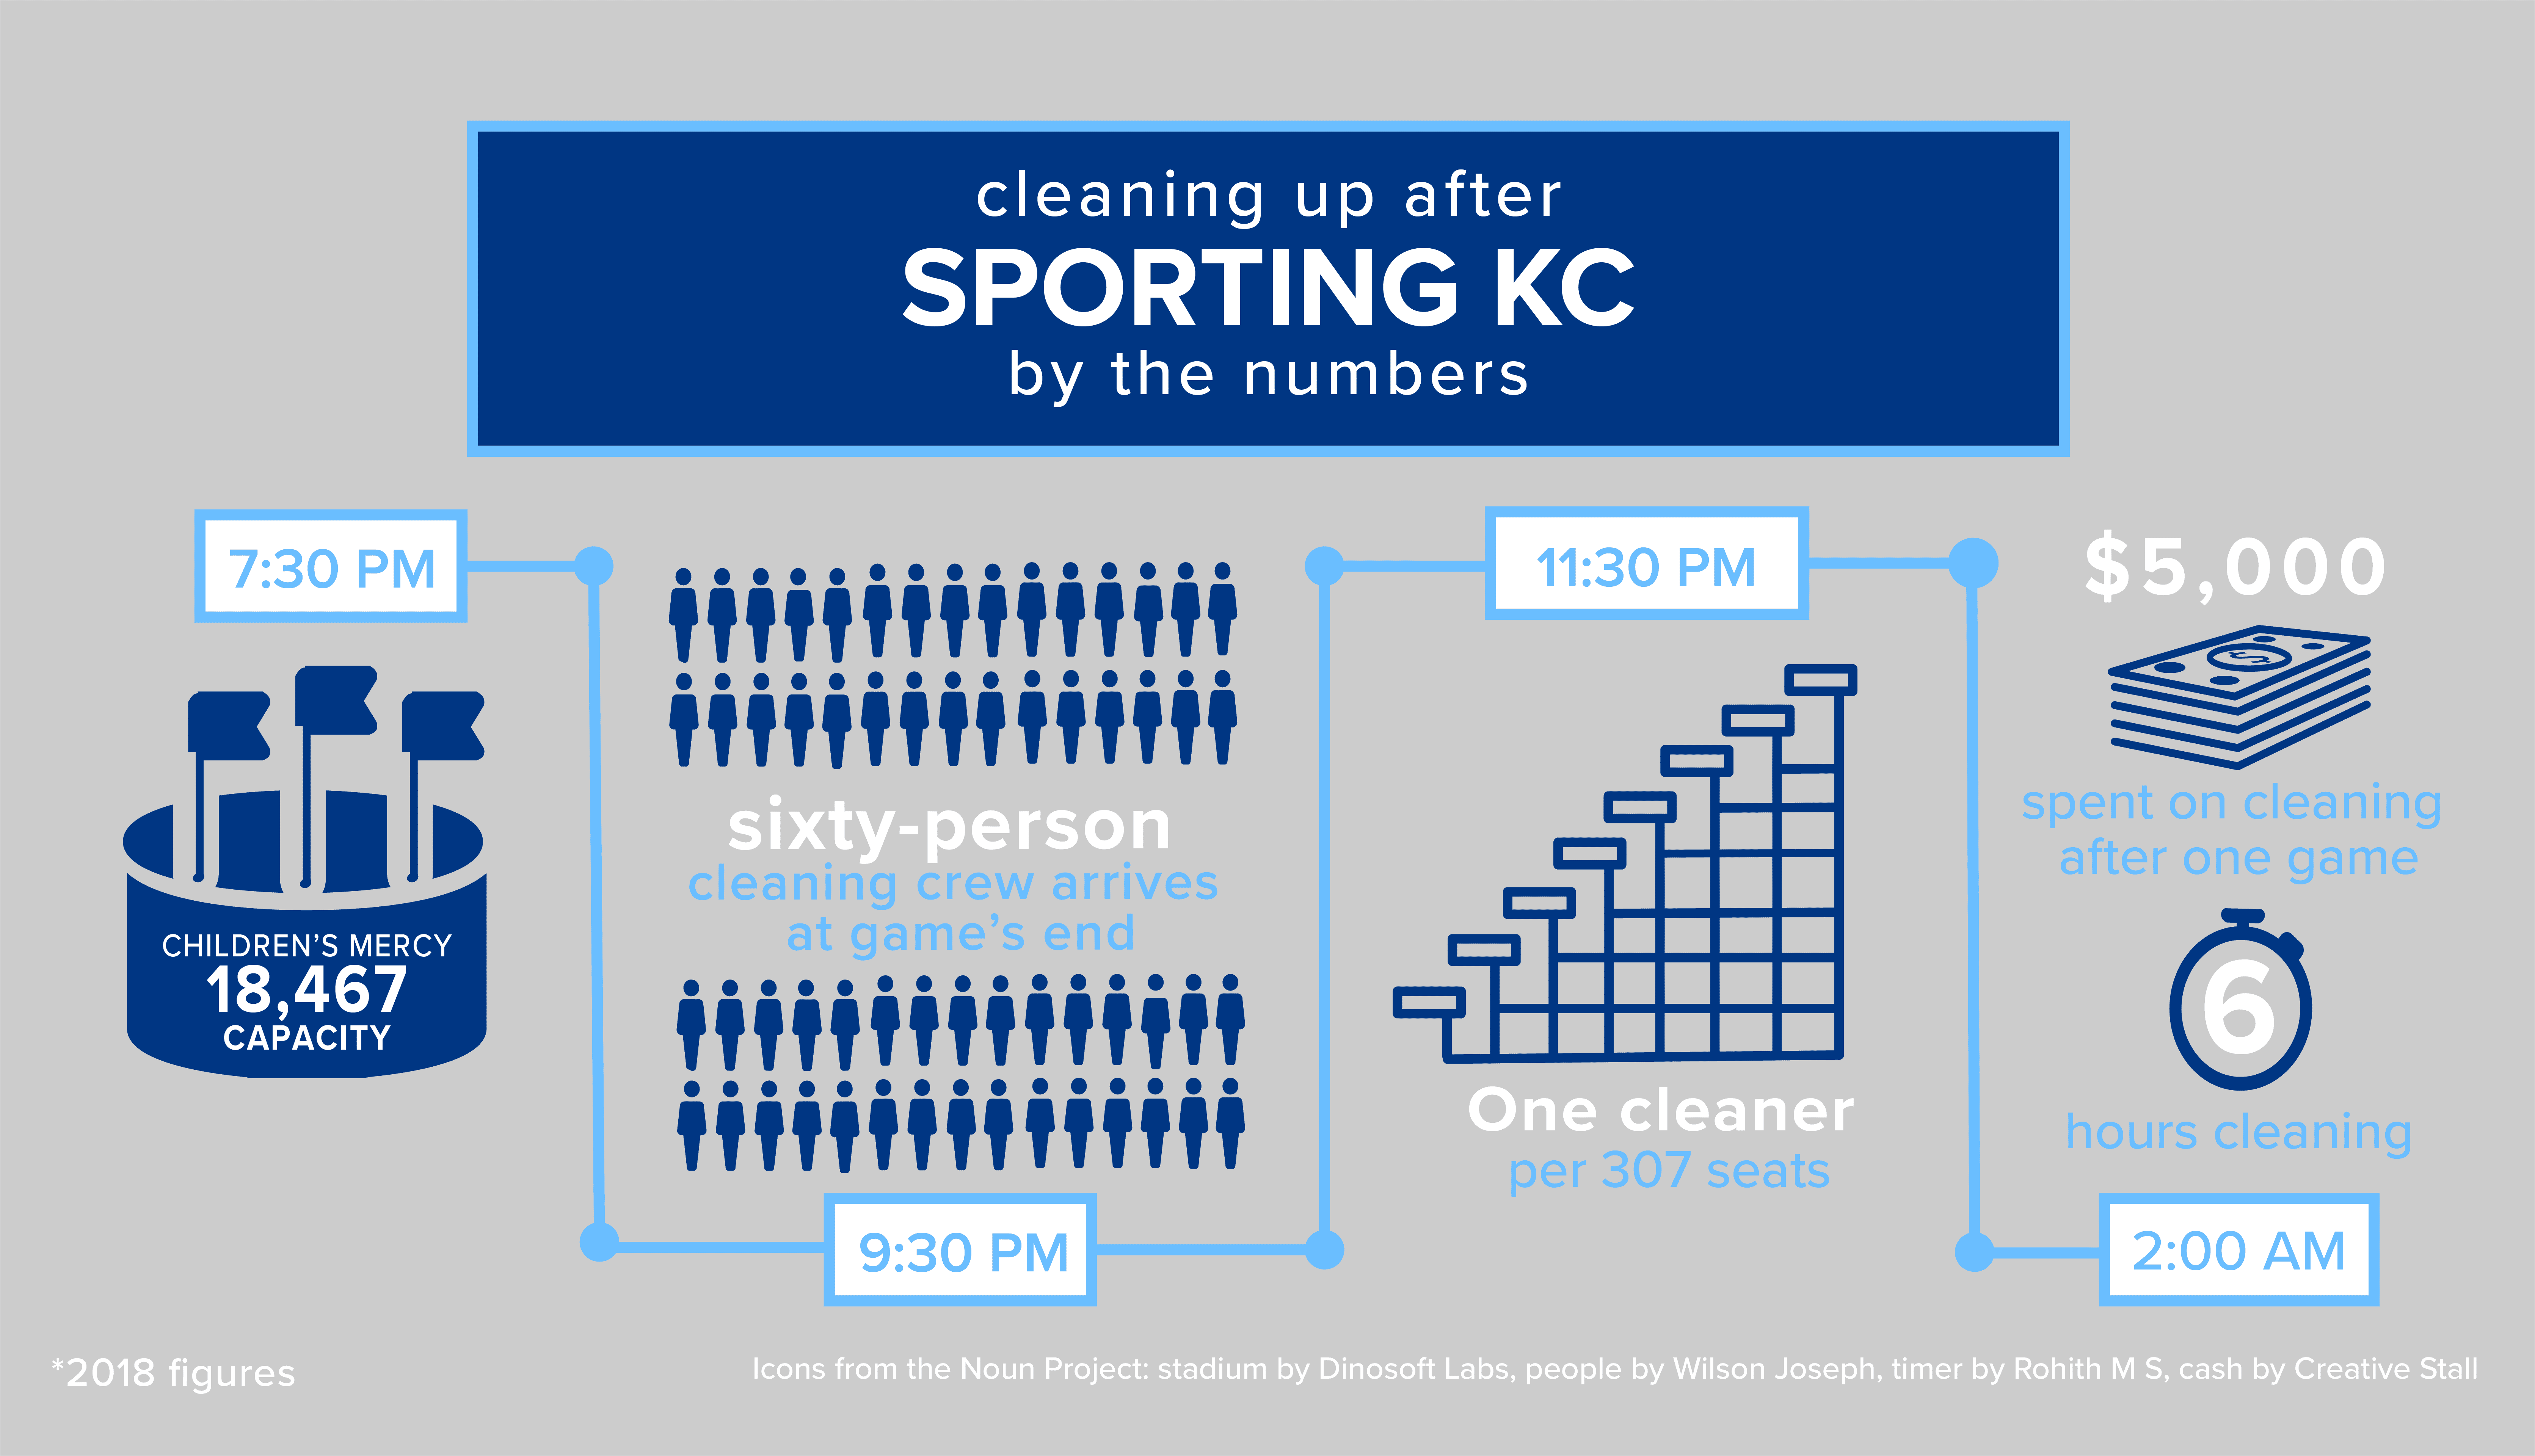 Cleaning up after Sporting KC by the Numbers - Infographic showing that at 7:30 PM. Children's Mercy has 18,467 capacity. A sixty-person crew arrives at game's end. at 9:30 p.m. at 11:30 p.m. one cleaner per 307 seats works. $5,000 is spent on cleaning after one game. It's 2:00 a.m. after 6 hours spent cleaning. 2018 figures.